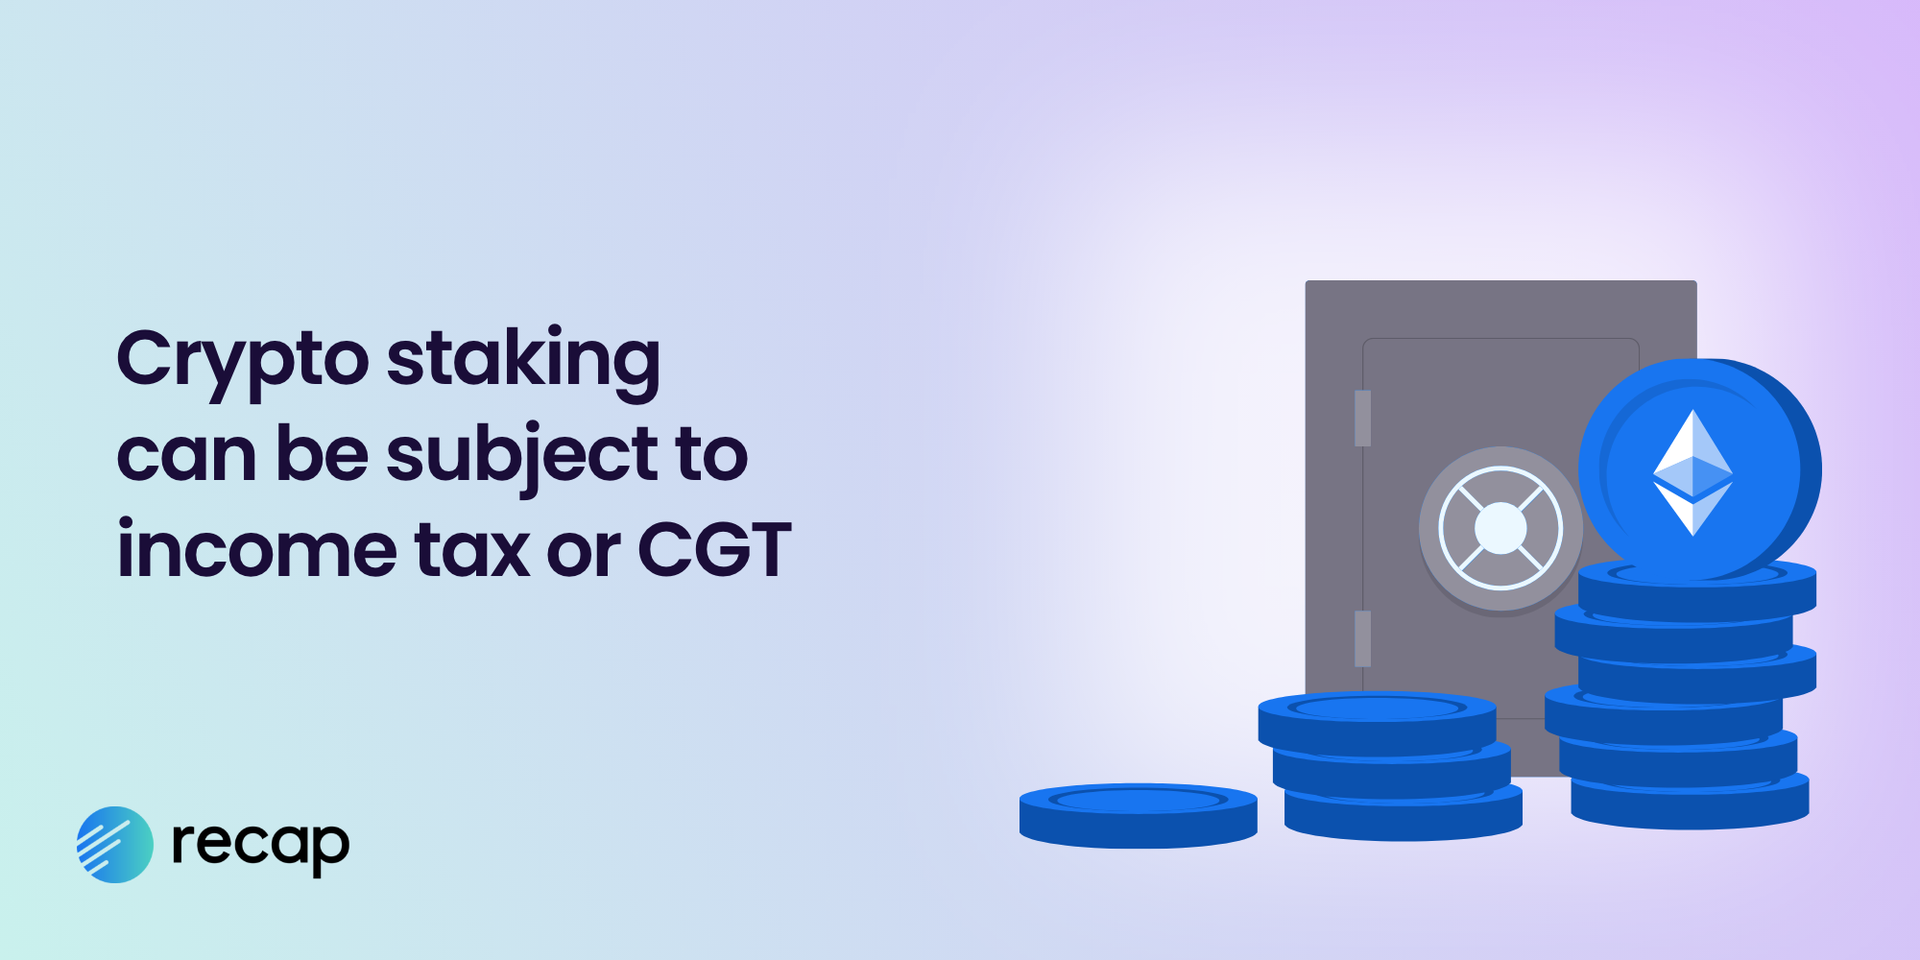 Infographic stating that crypto staking can be subject to income tax or capital gains tax